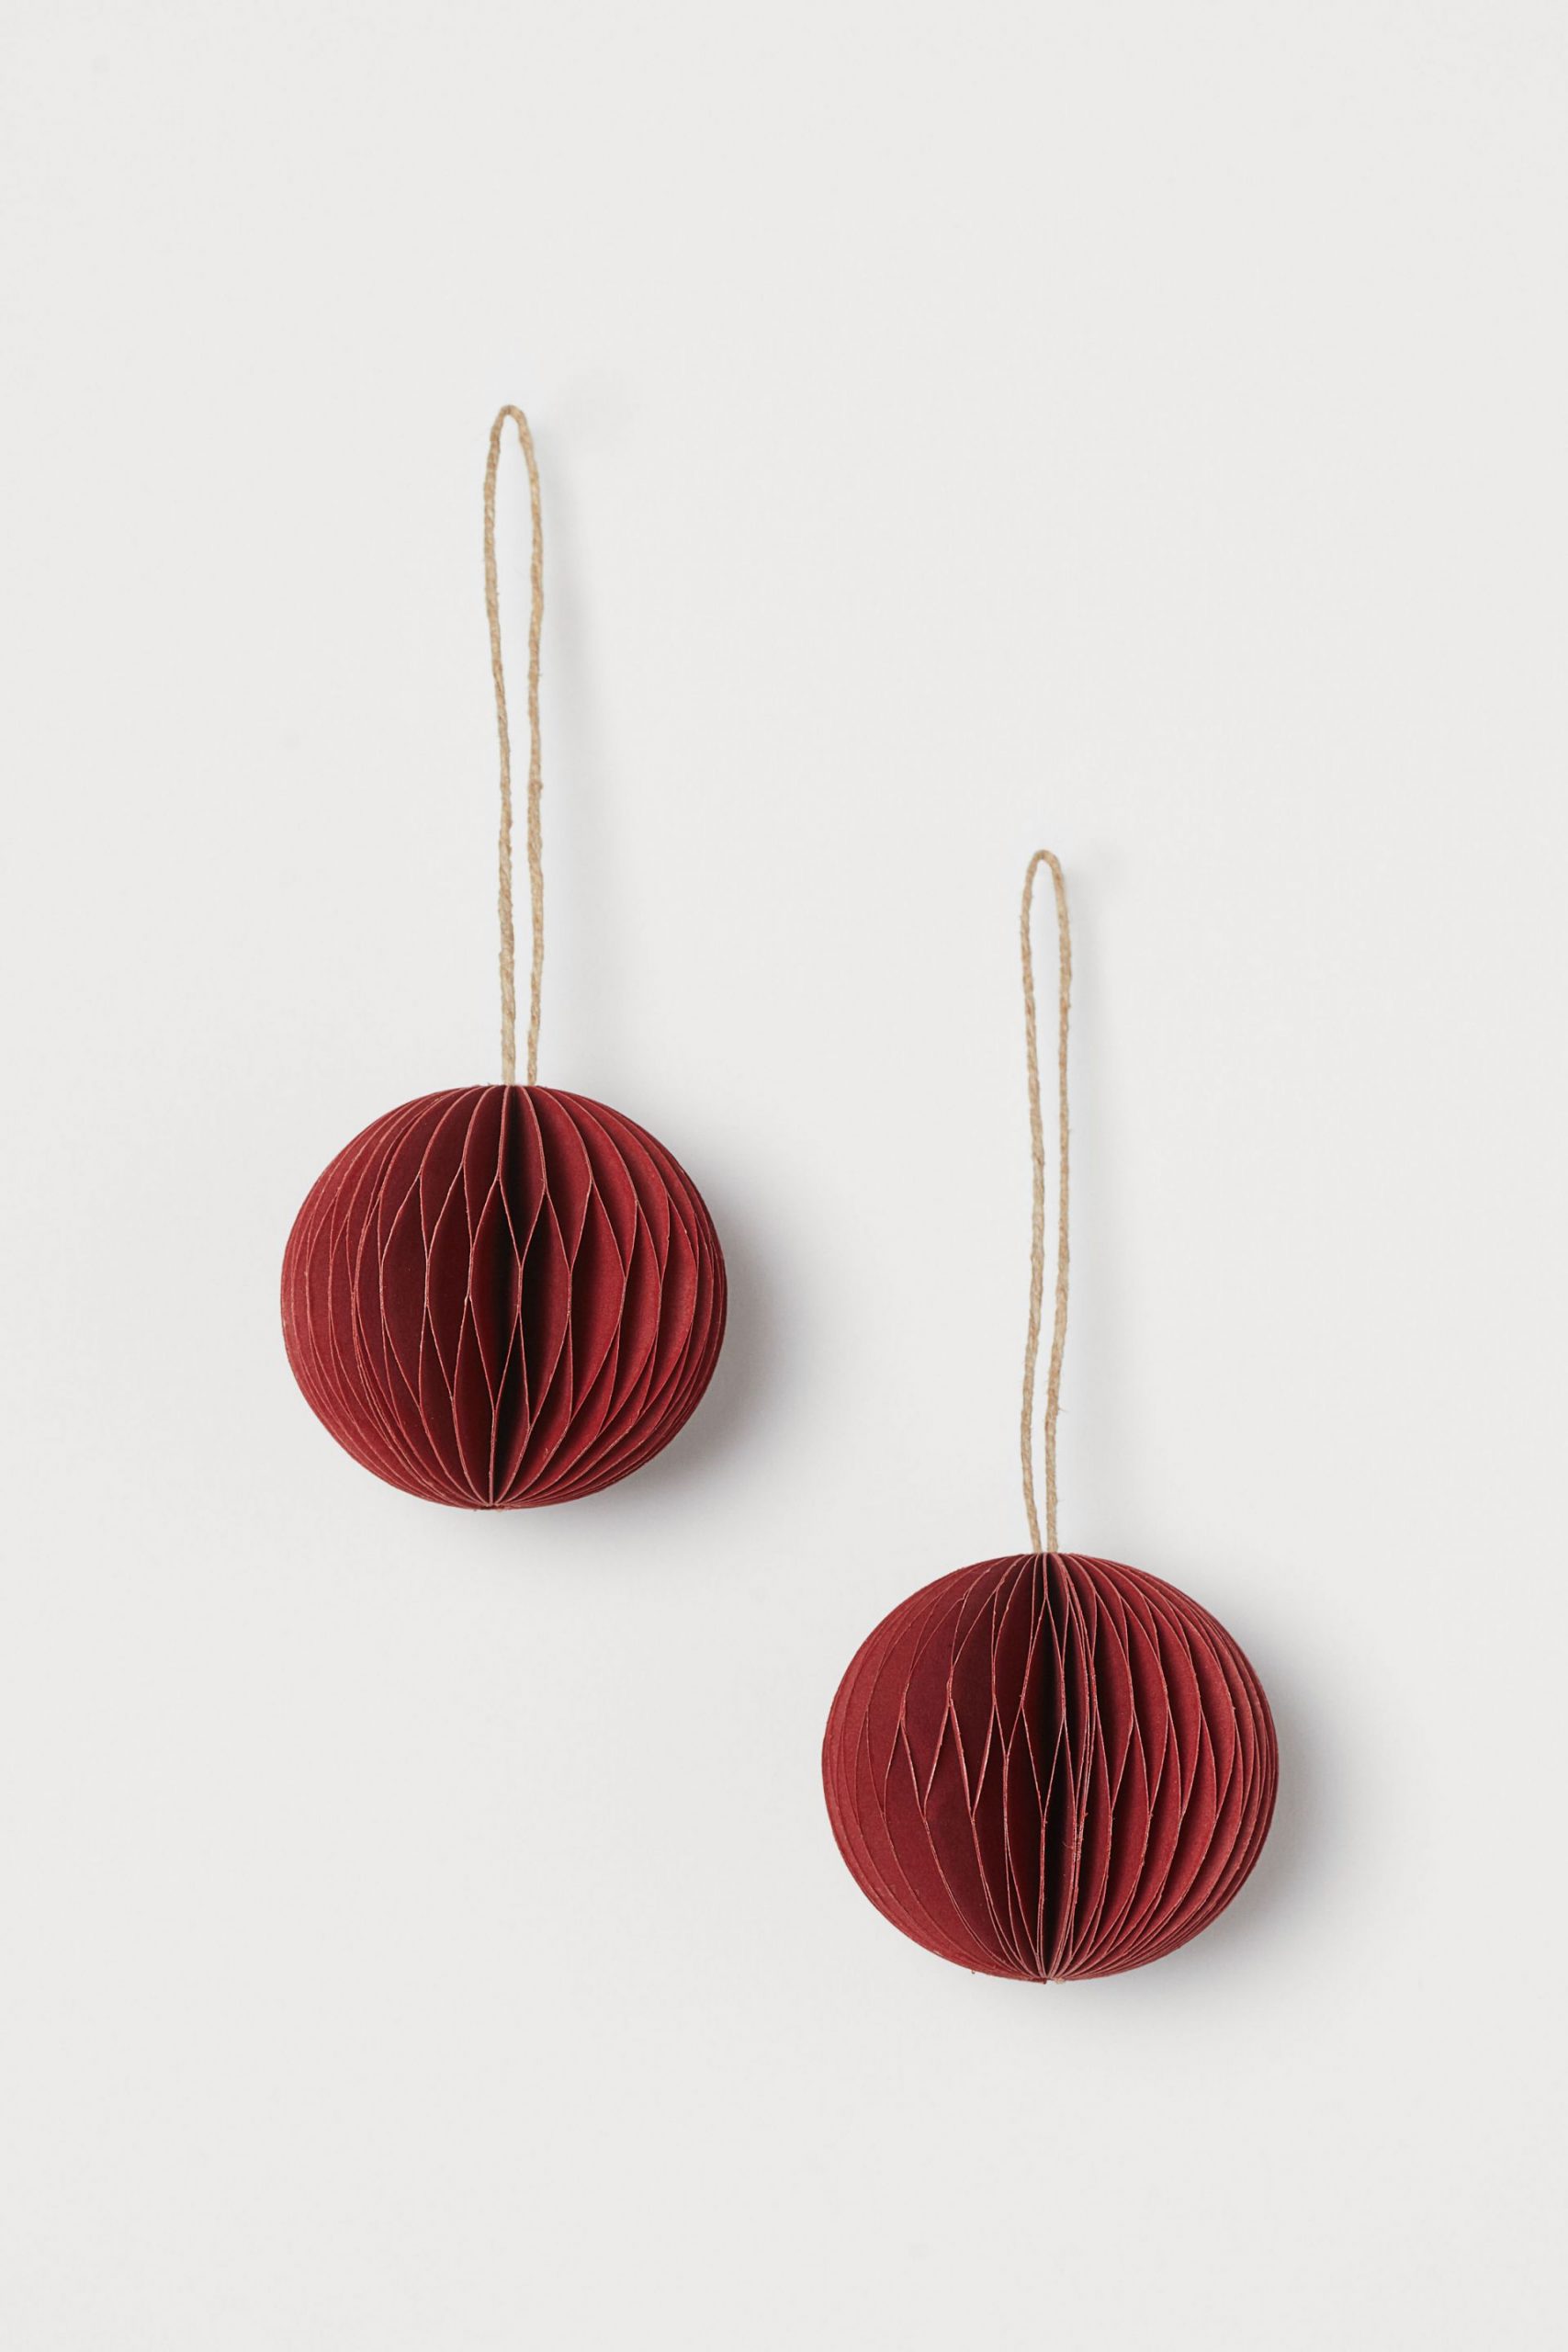 2-pack Christmas tree baubles scaled